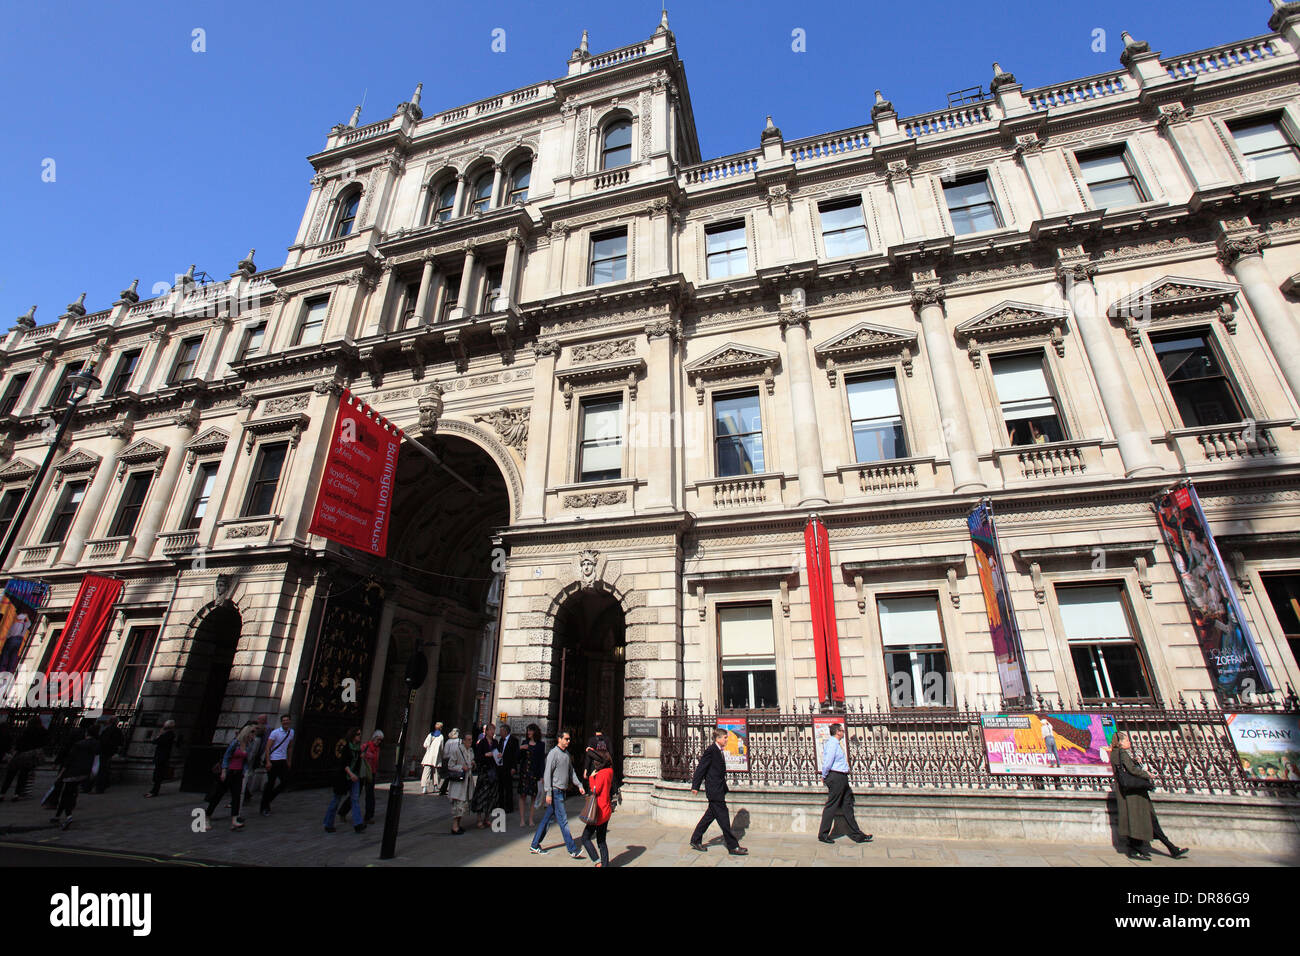 united kingdom central london piccadilly entrance to burlington house and the royal academy of arts Stock Photo